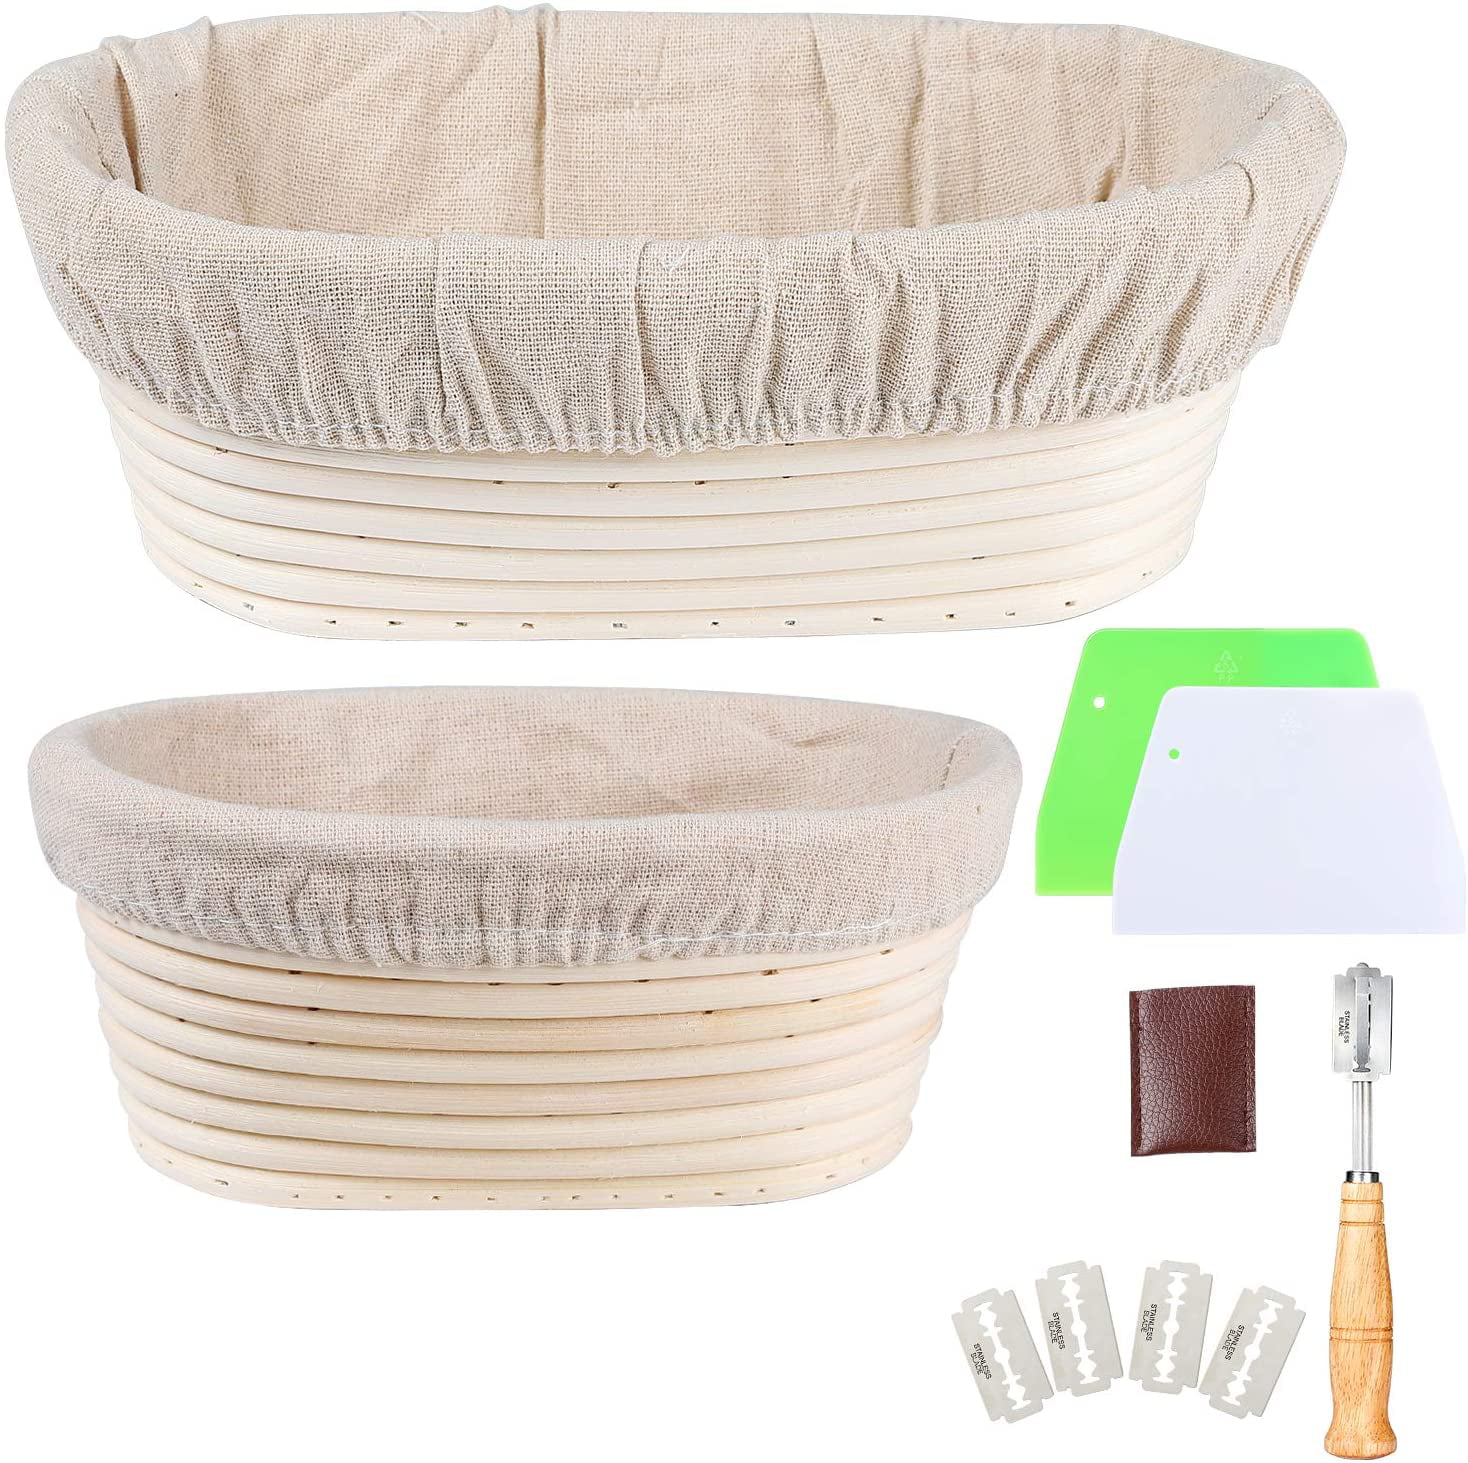 Steel-Clamped Scraper Wicker Cane Oval, for 1.5 & 2.2 lb of Sourdough w/Covering Banneton Bread Proofing Basket Set of 2 Stainl Natural Fermentation Baskets